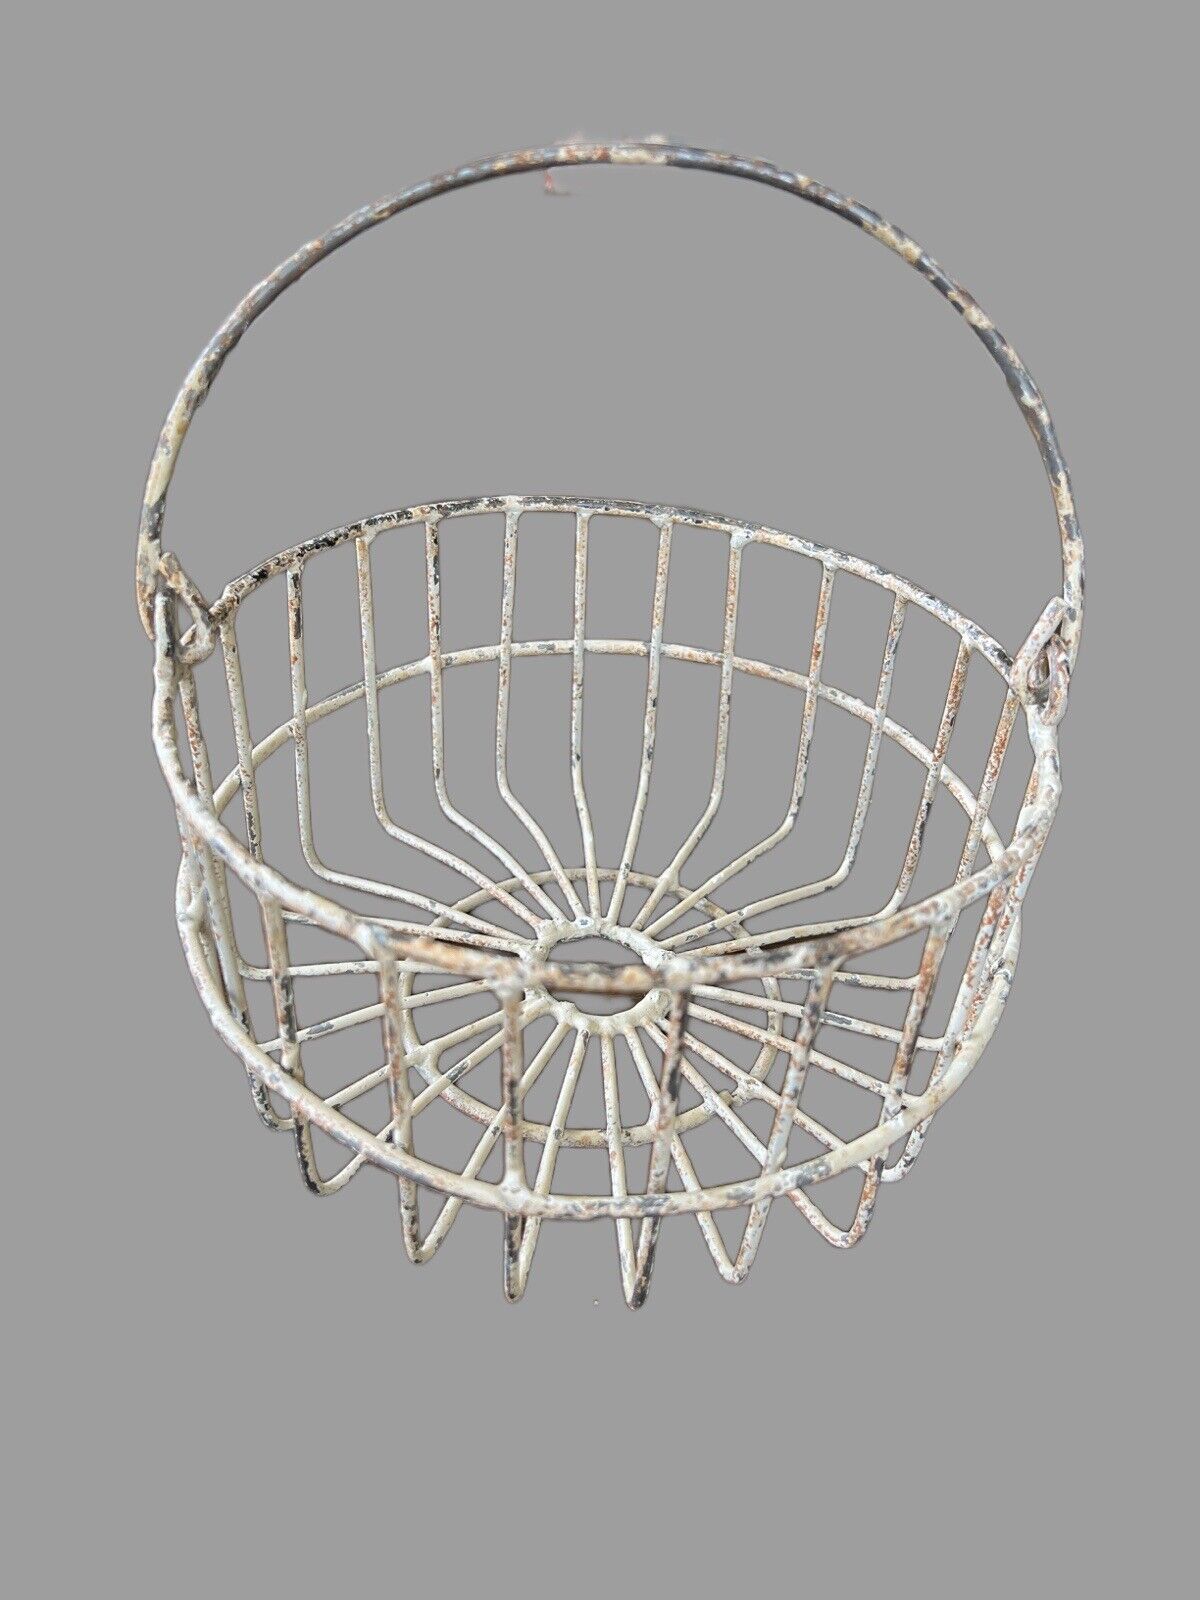 Antique Style Rustic White Painted Metal Wire Egg Farm Basket with Bail Handle